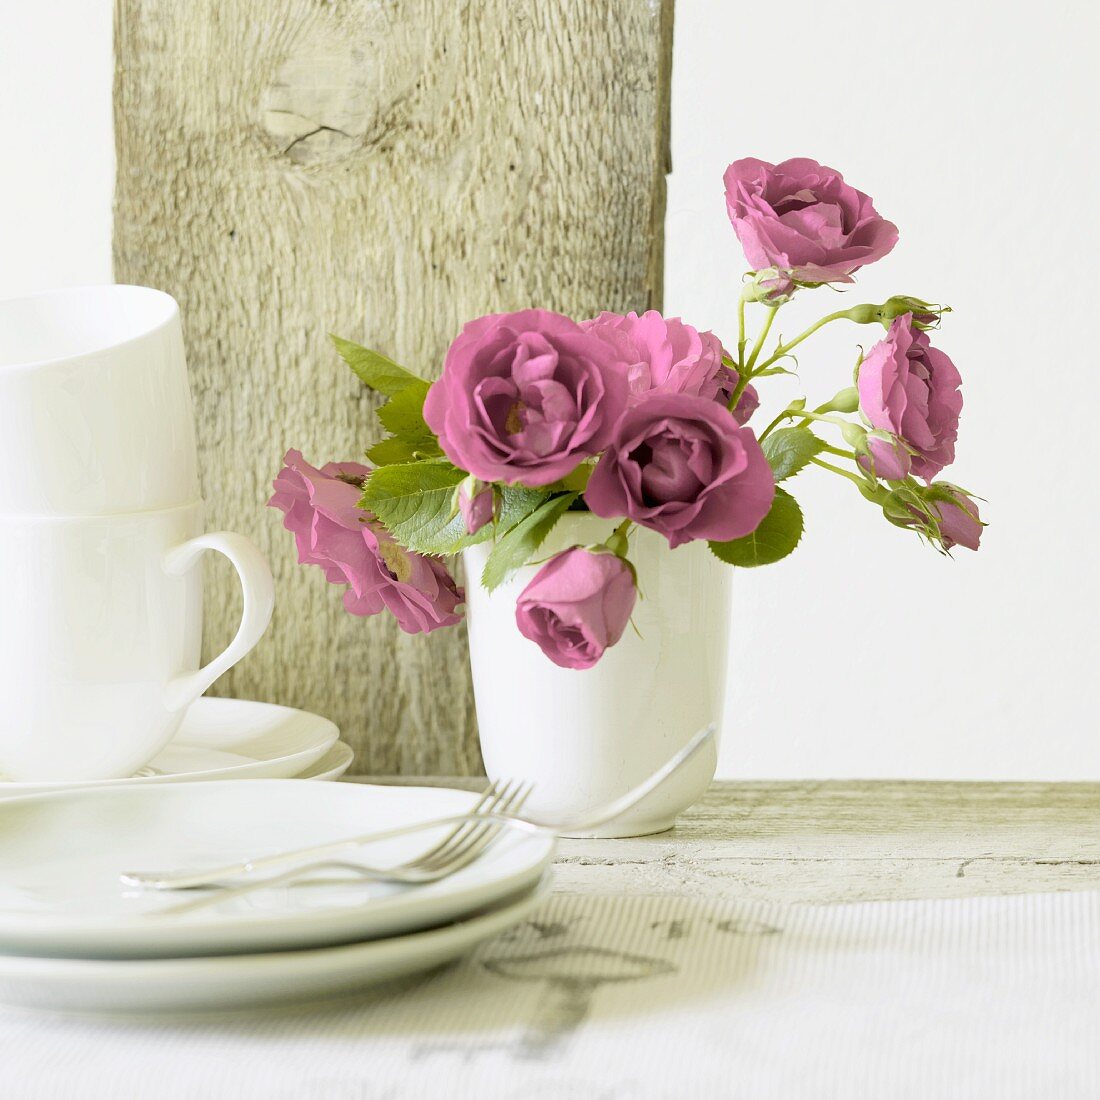 Pink roses in ceramic vase, teacups and side plates